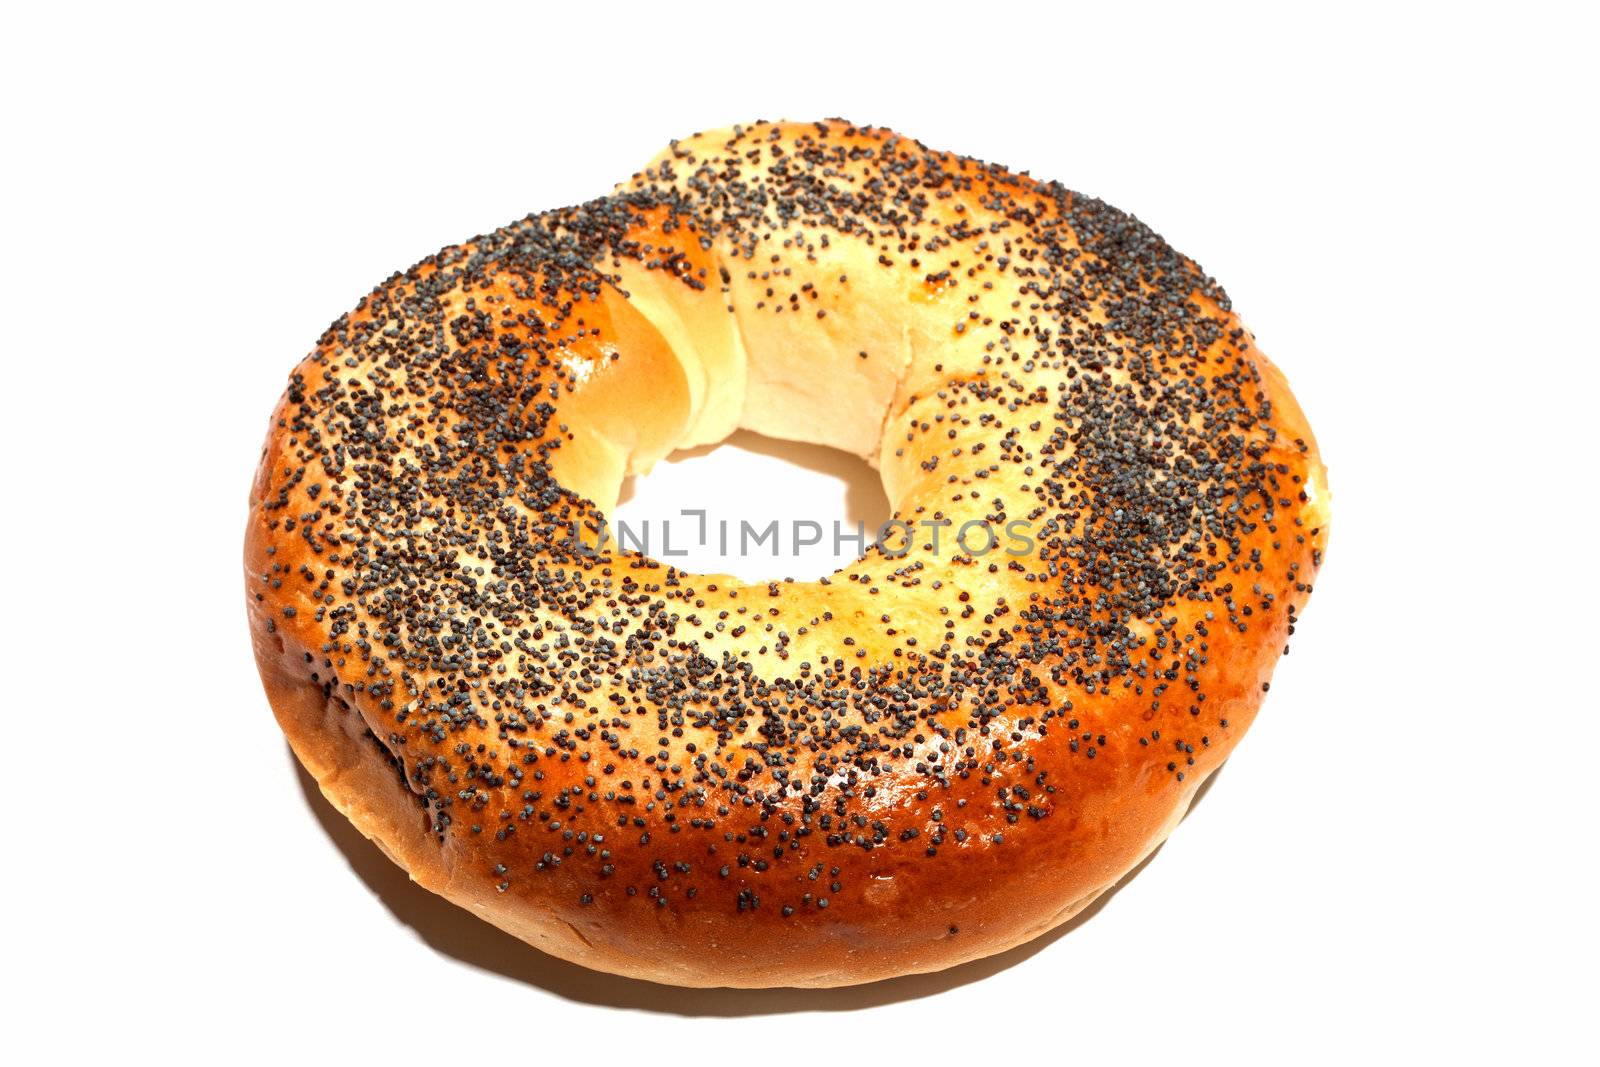 bagels with poppy seeds isolated on white background